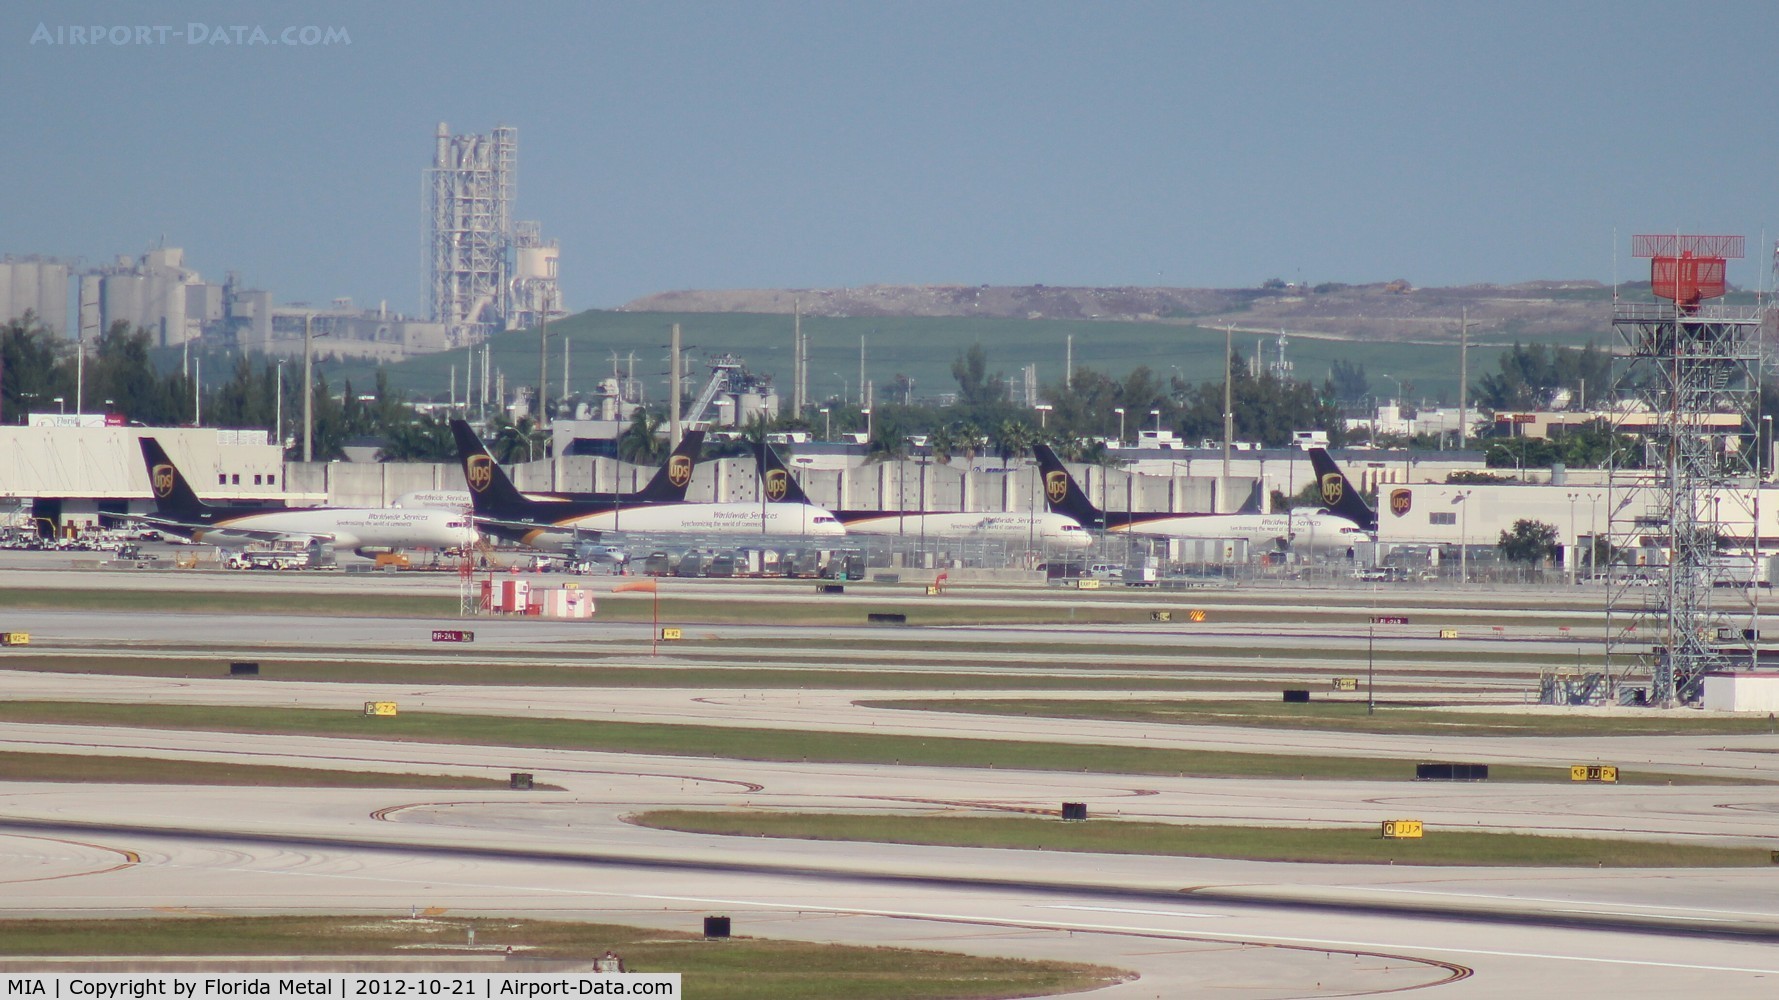 Miami International Airport (MIA) - UPS at Miami, noticed for the first time the Landfill in the background - no where near as close as it appears